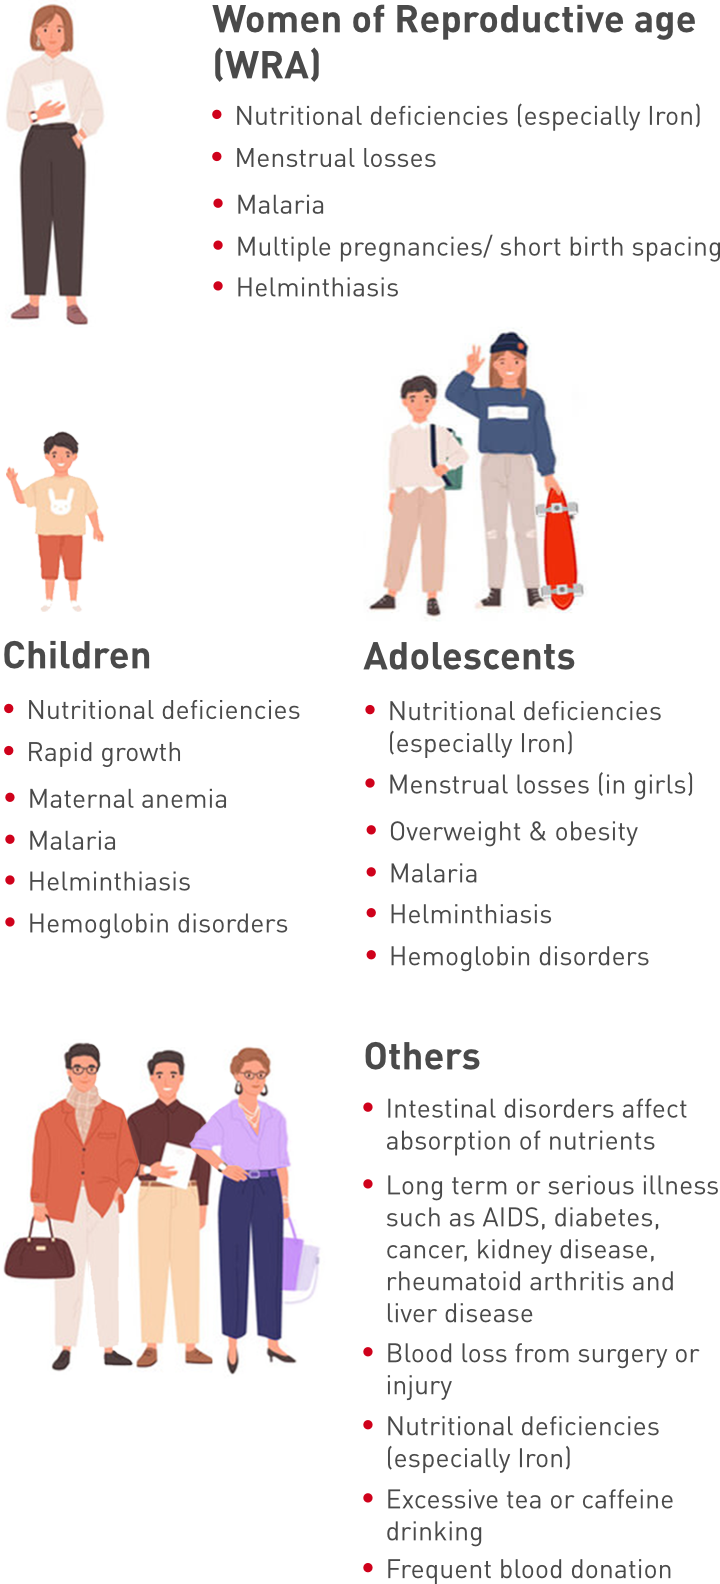 Risk factors for developing anemia